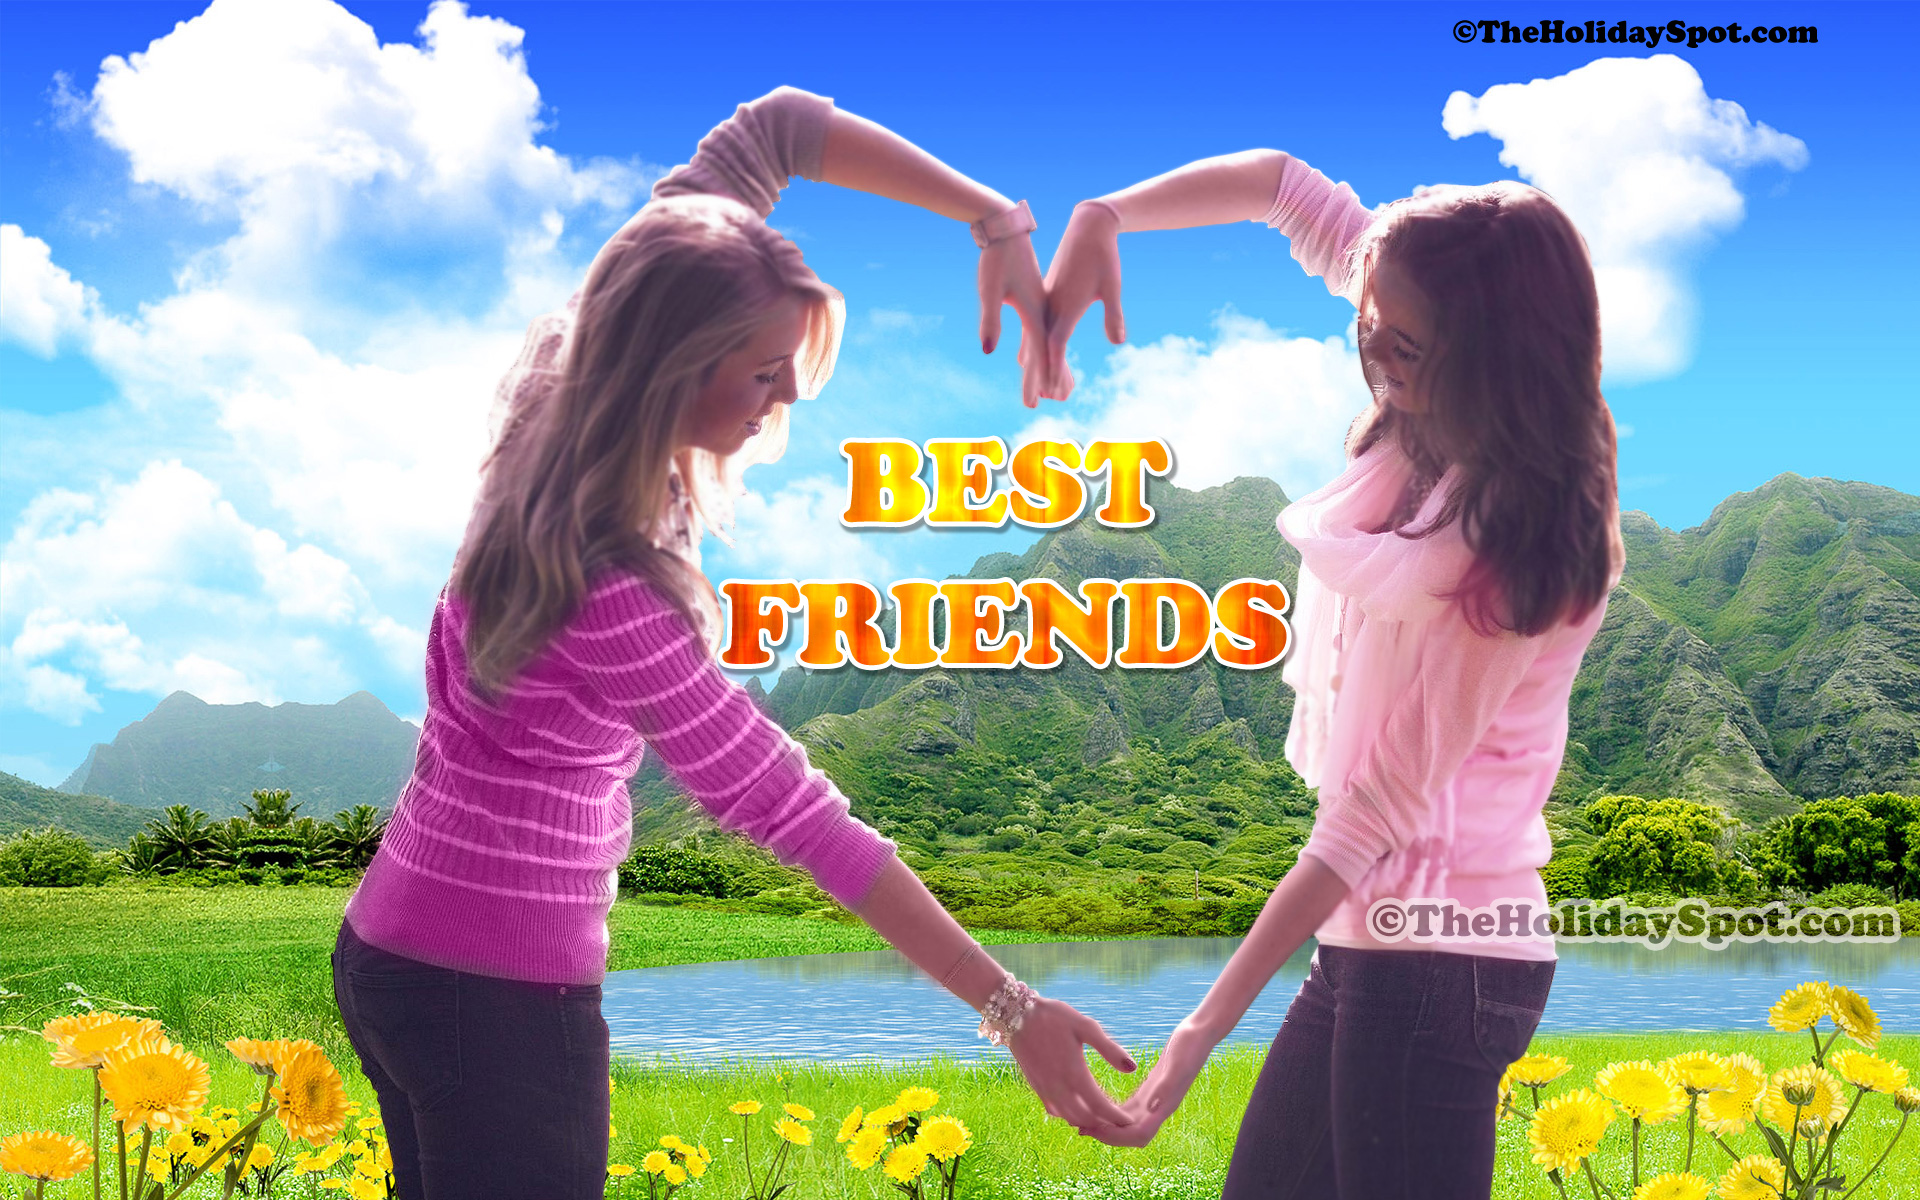 Free Download High Quality Wallpaper On Friendship Featuring Two Friend